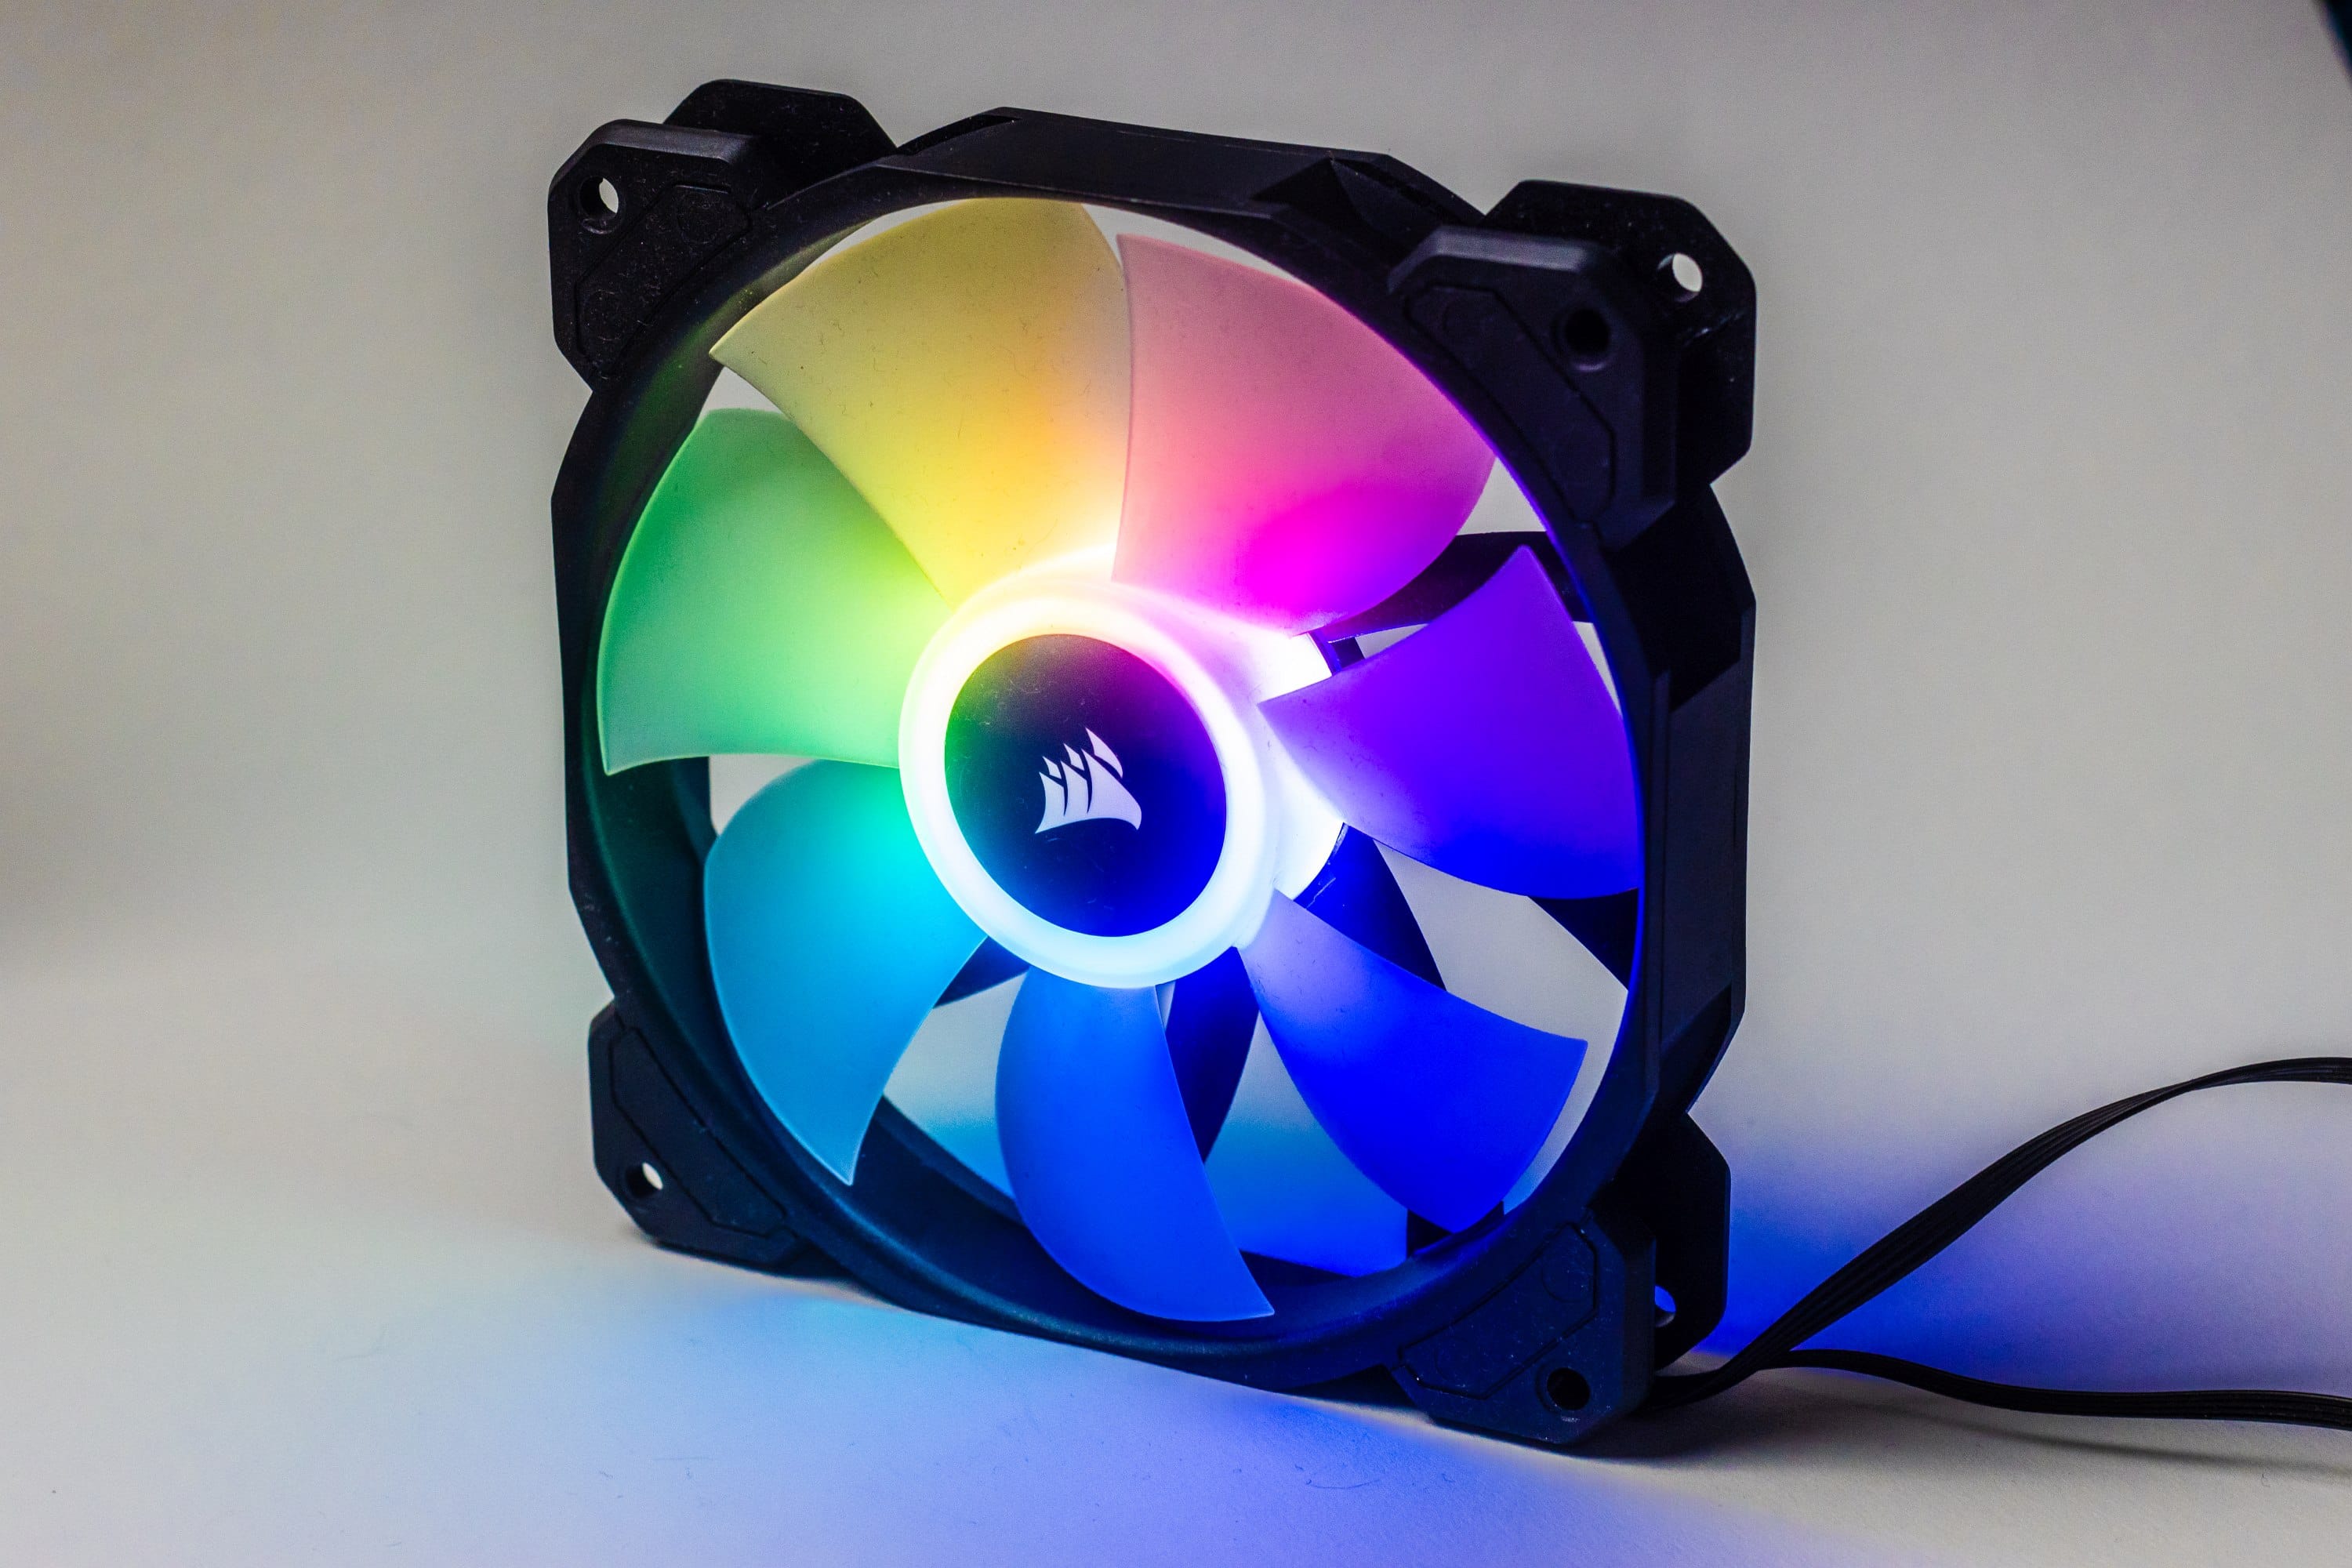 Corsair SP RGB Elite fan test - they put the pressure on!